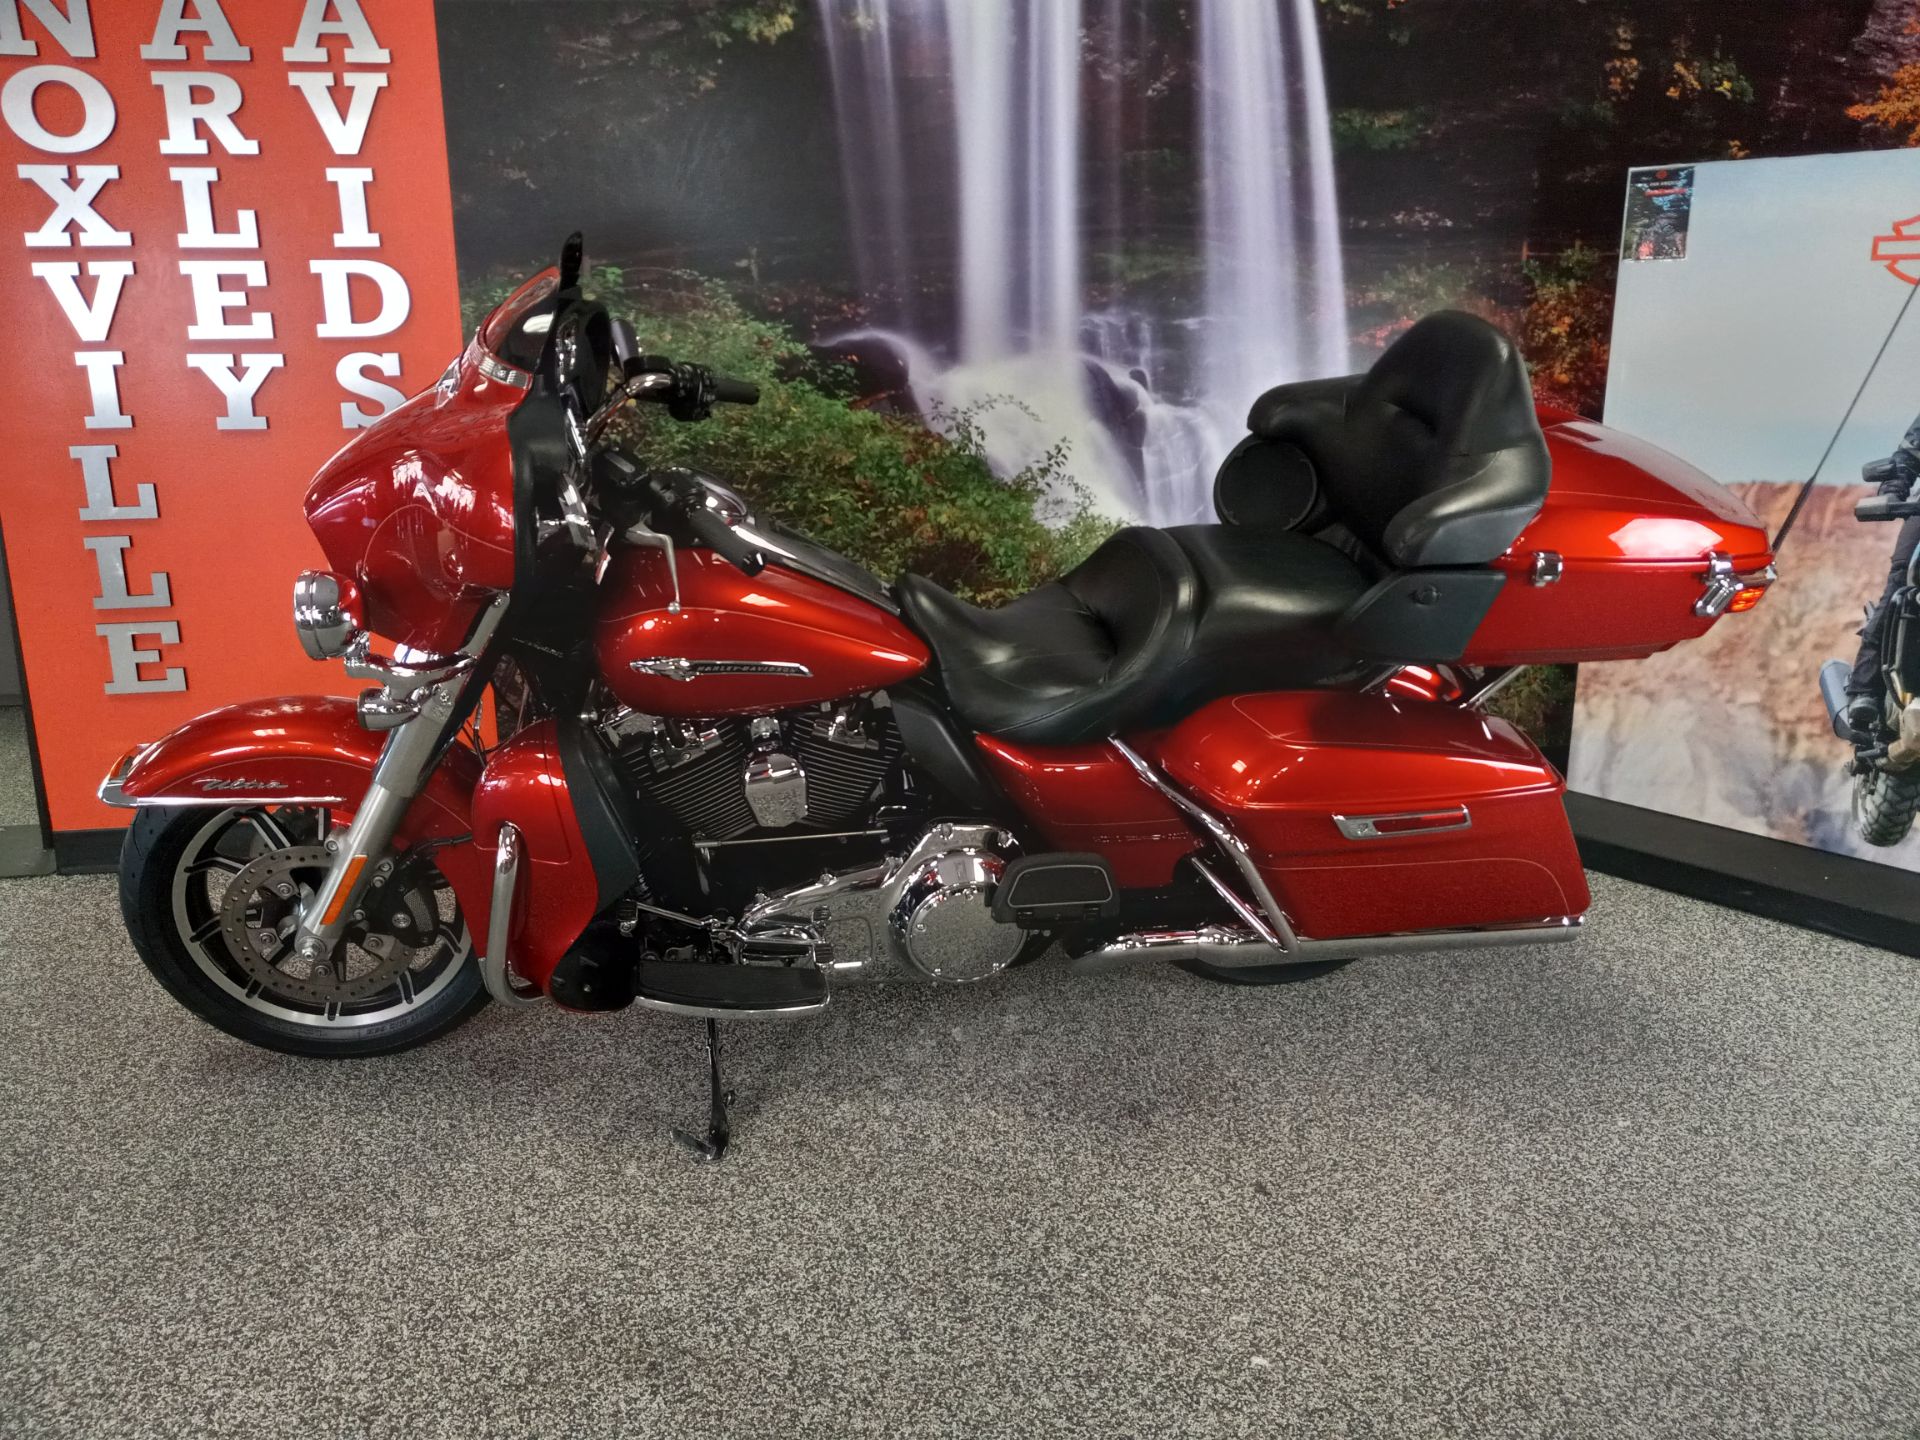 2014 Harley-Davidson Electra Glide® Ultra Classic® in Knoxville, Tennessee - Photo 2